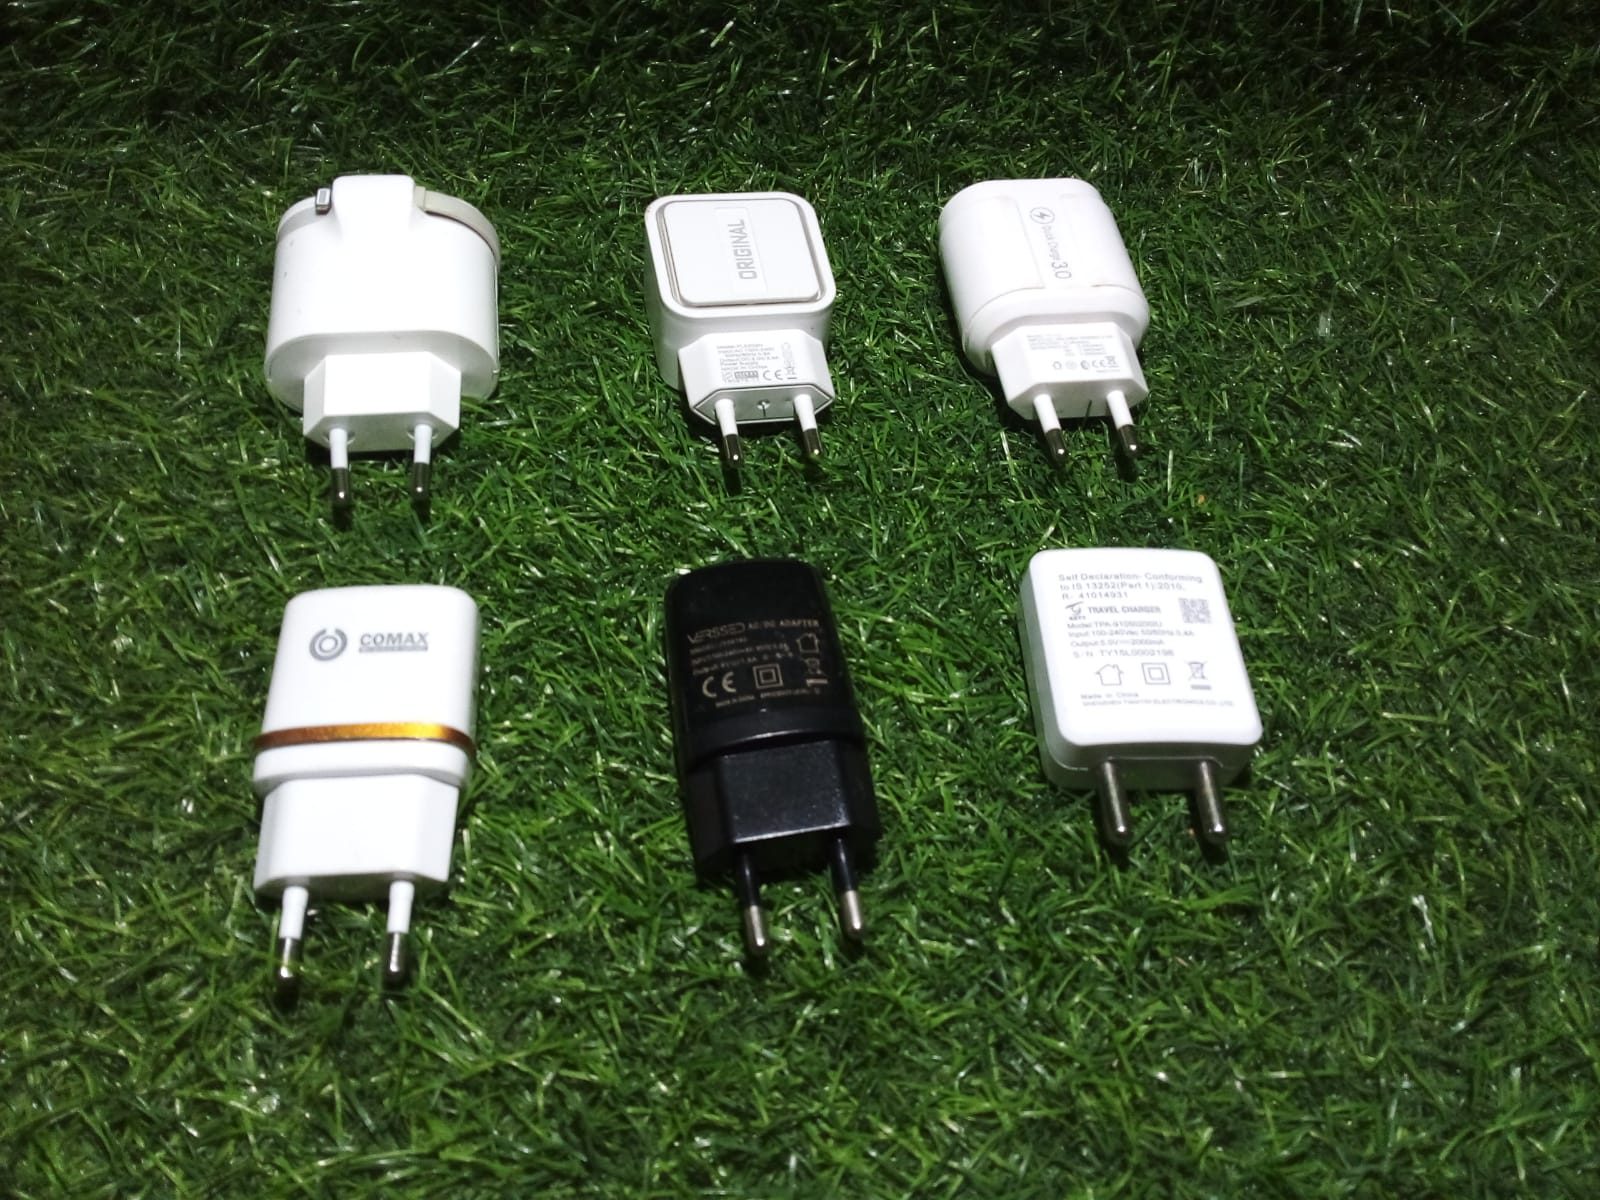 6103 USB Fast Charger Adapter (Adapter Only)